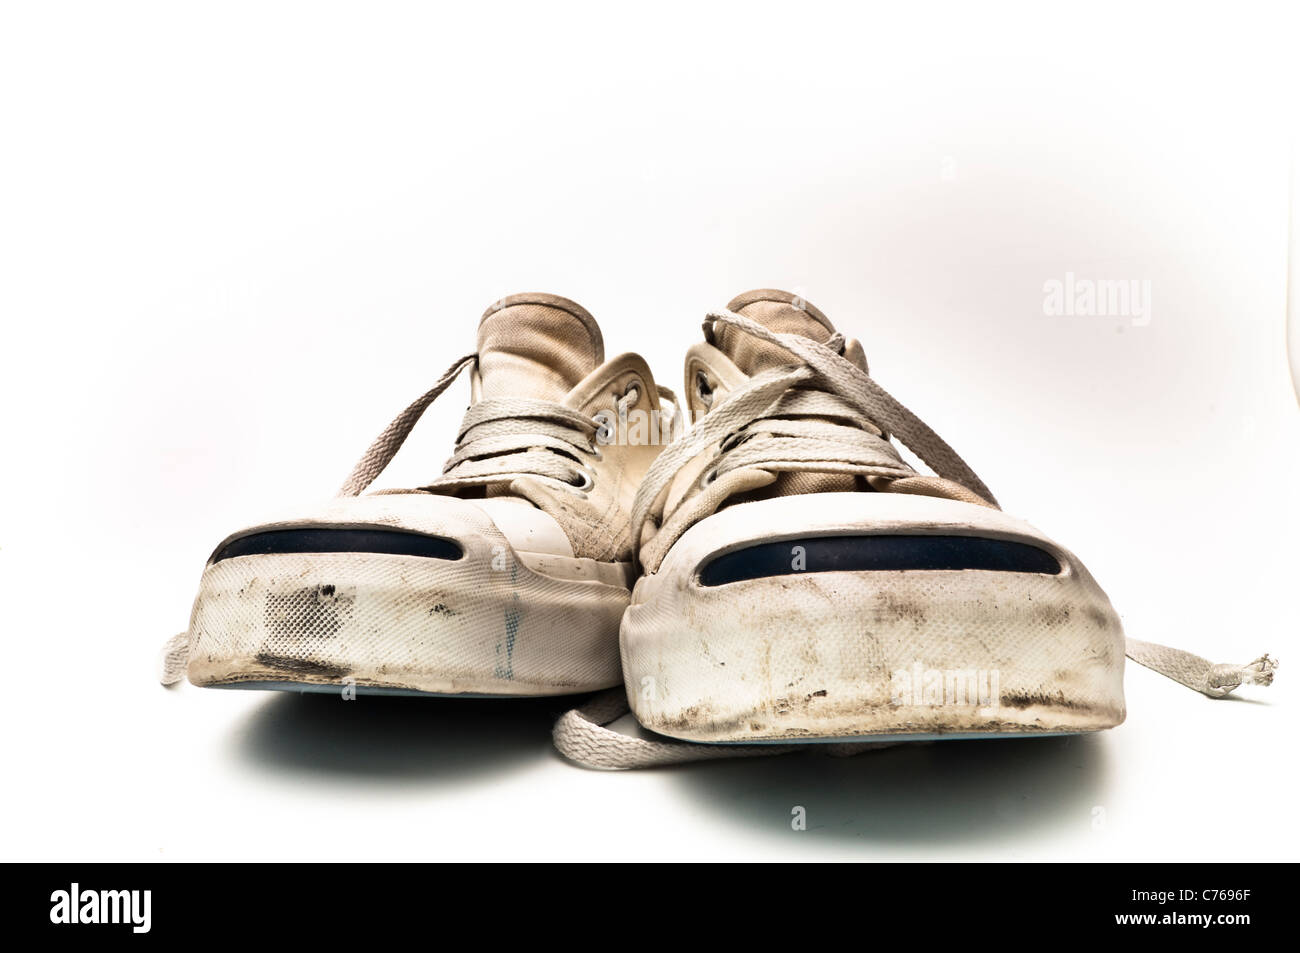 Converse Jack Purcell tennis shoes on a white background Stock Photo